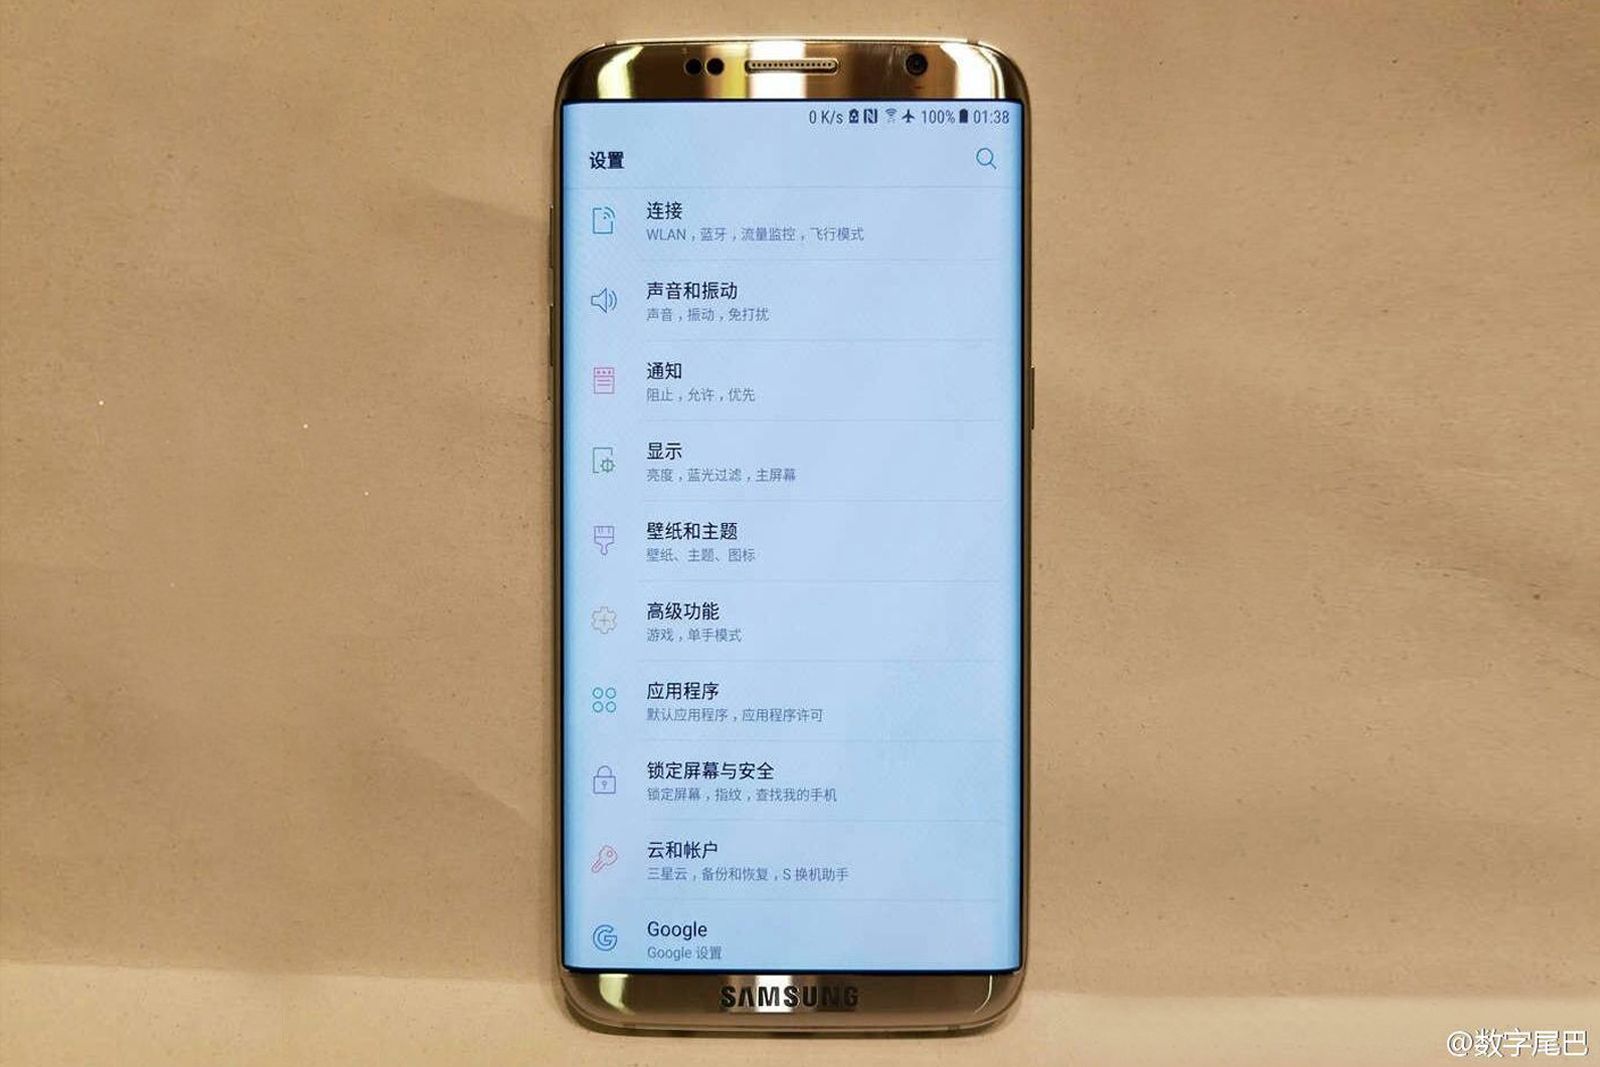 huge picture leak seemingly confirms samsung galaxy s8 design image 1